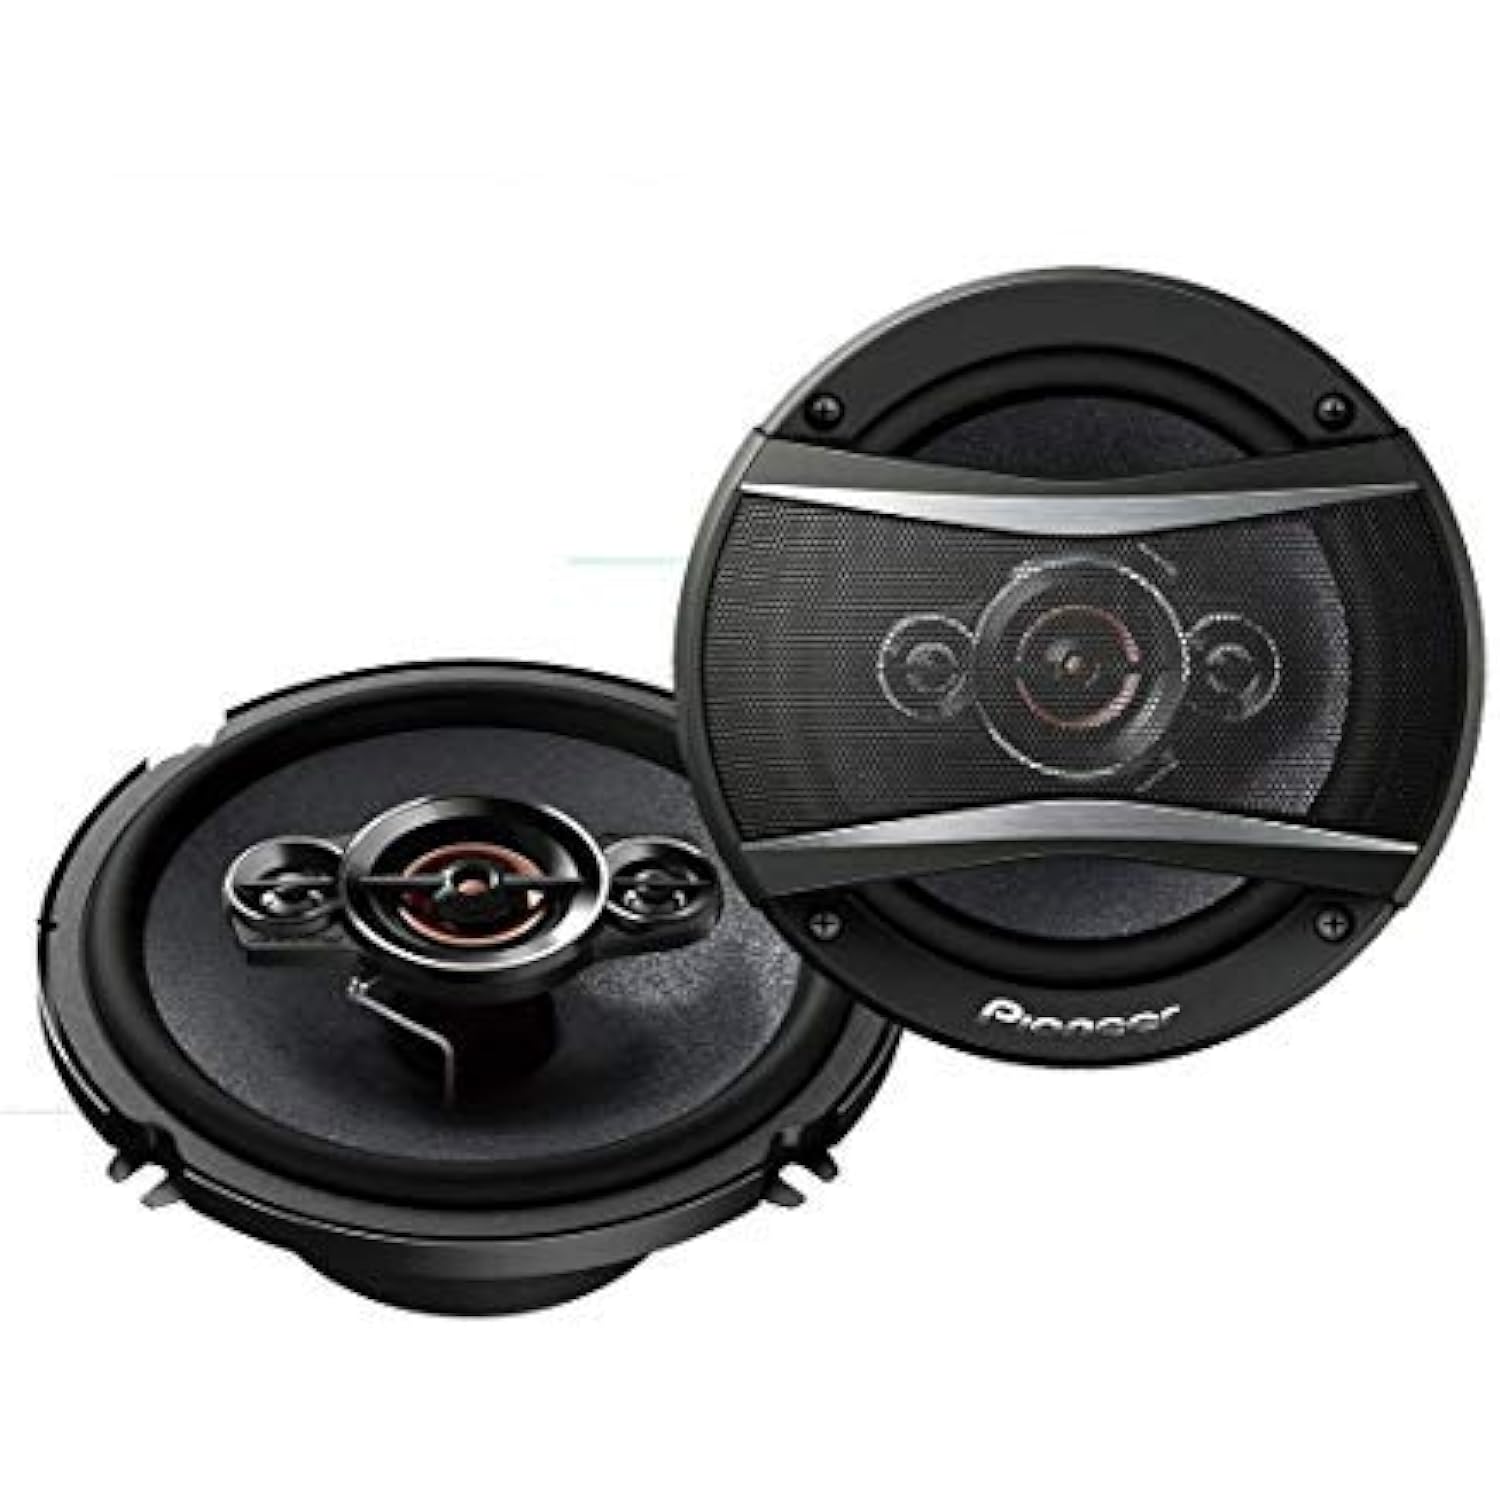 PIONEER TS-A1686S 6.5" 350W 4-Way TWEETERS CAR Stereo COAXIAL Speakers TS-A1686R